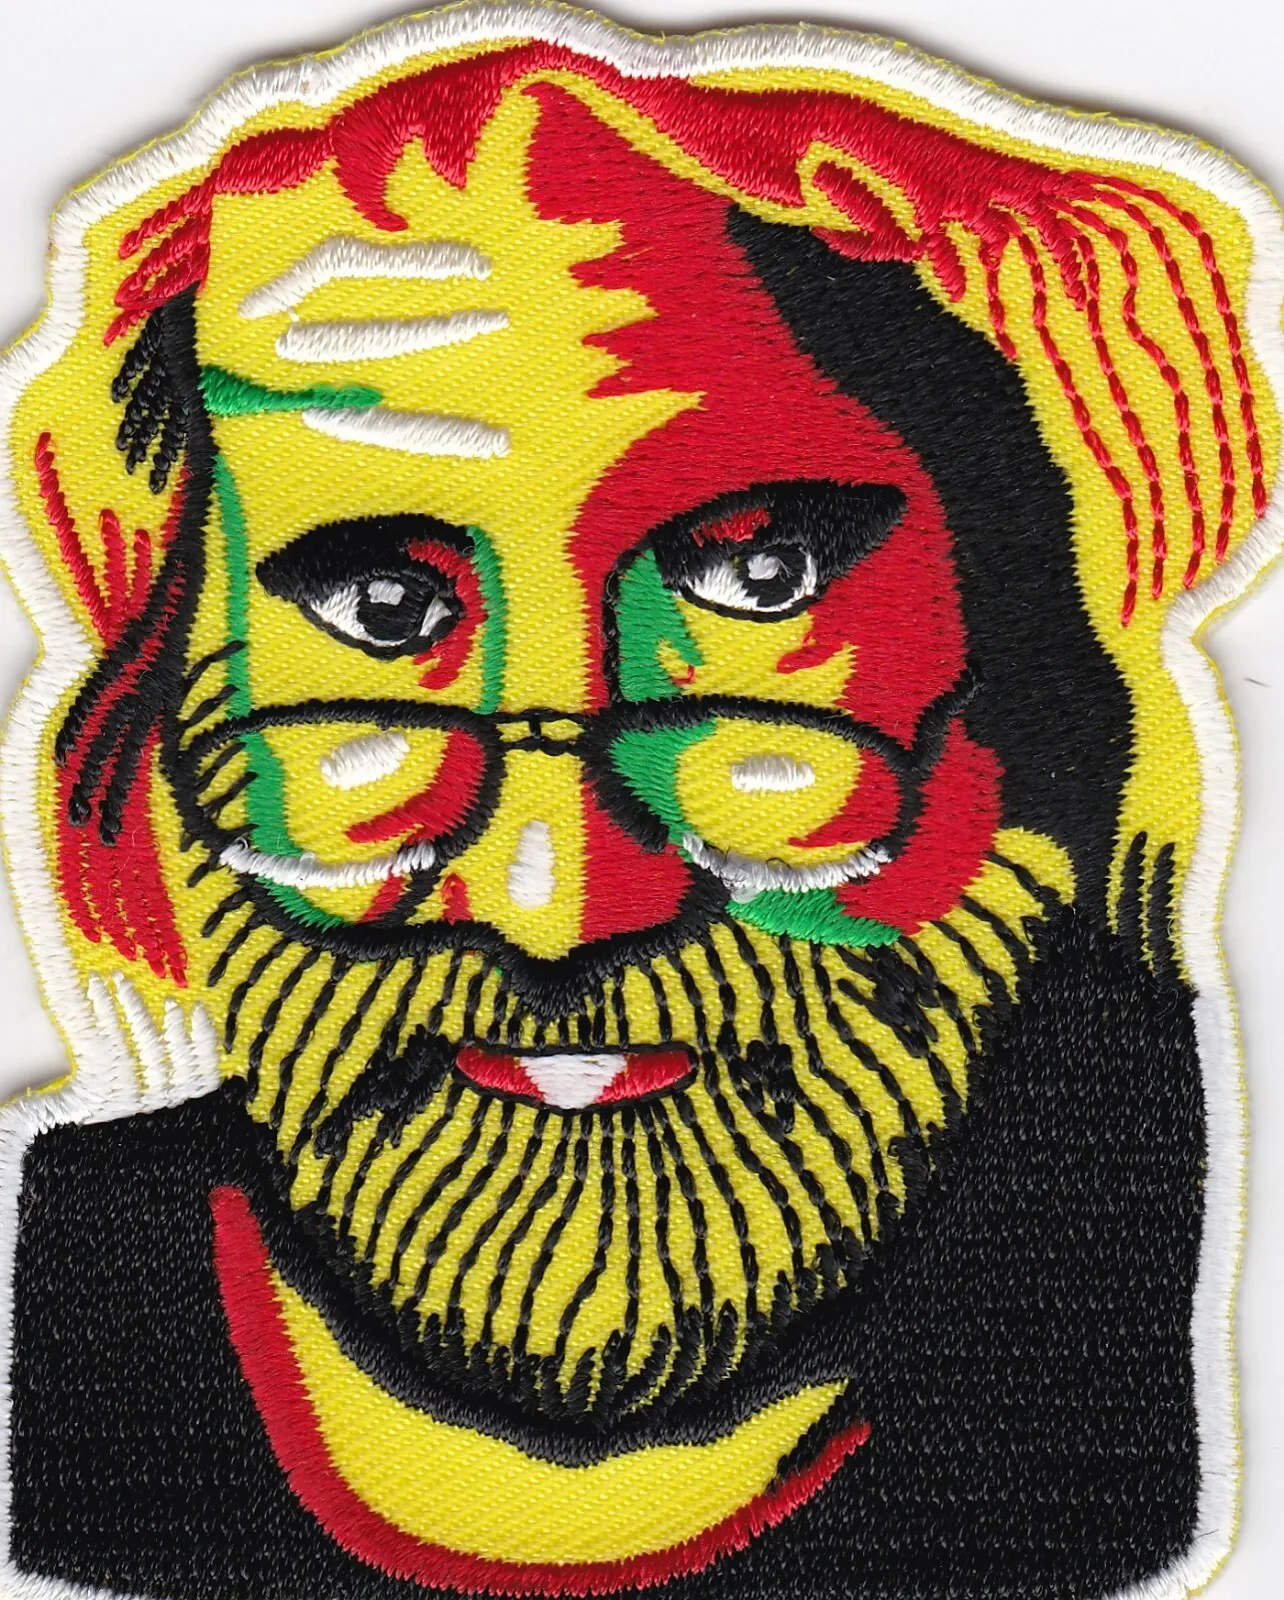 Grateful Dead - Jerry's Face - Iron Or Sew-on Patch